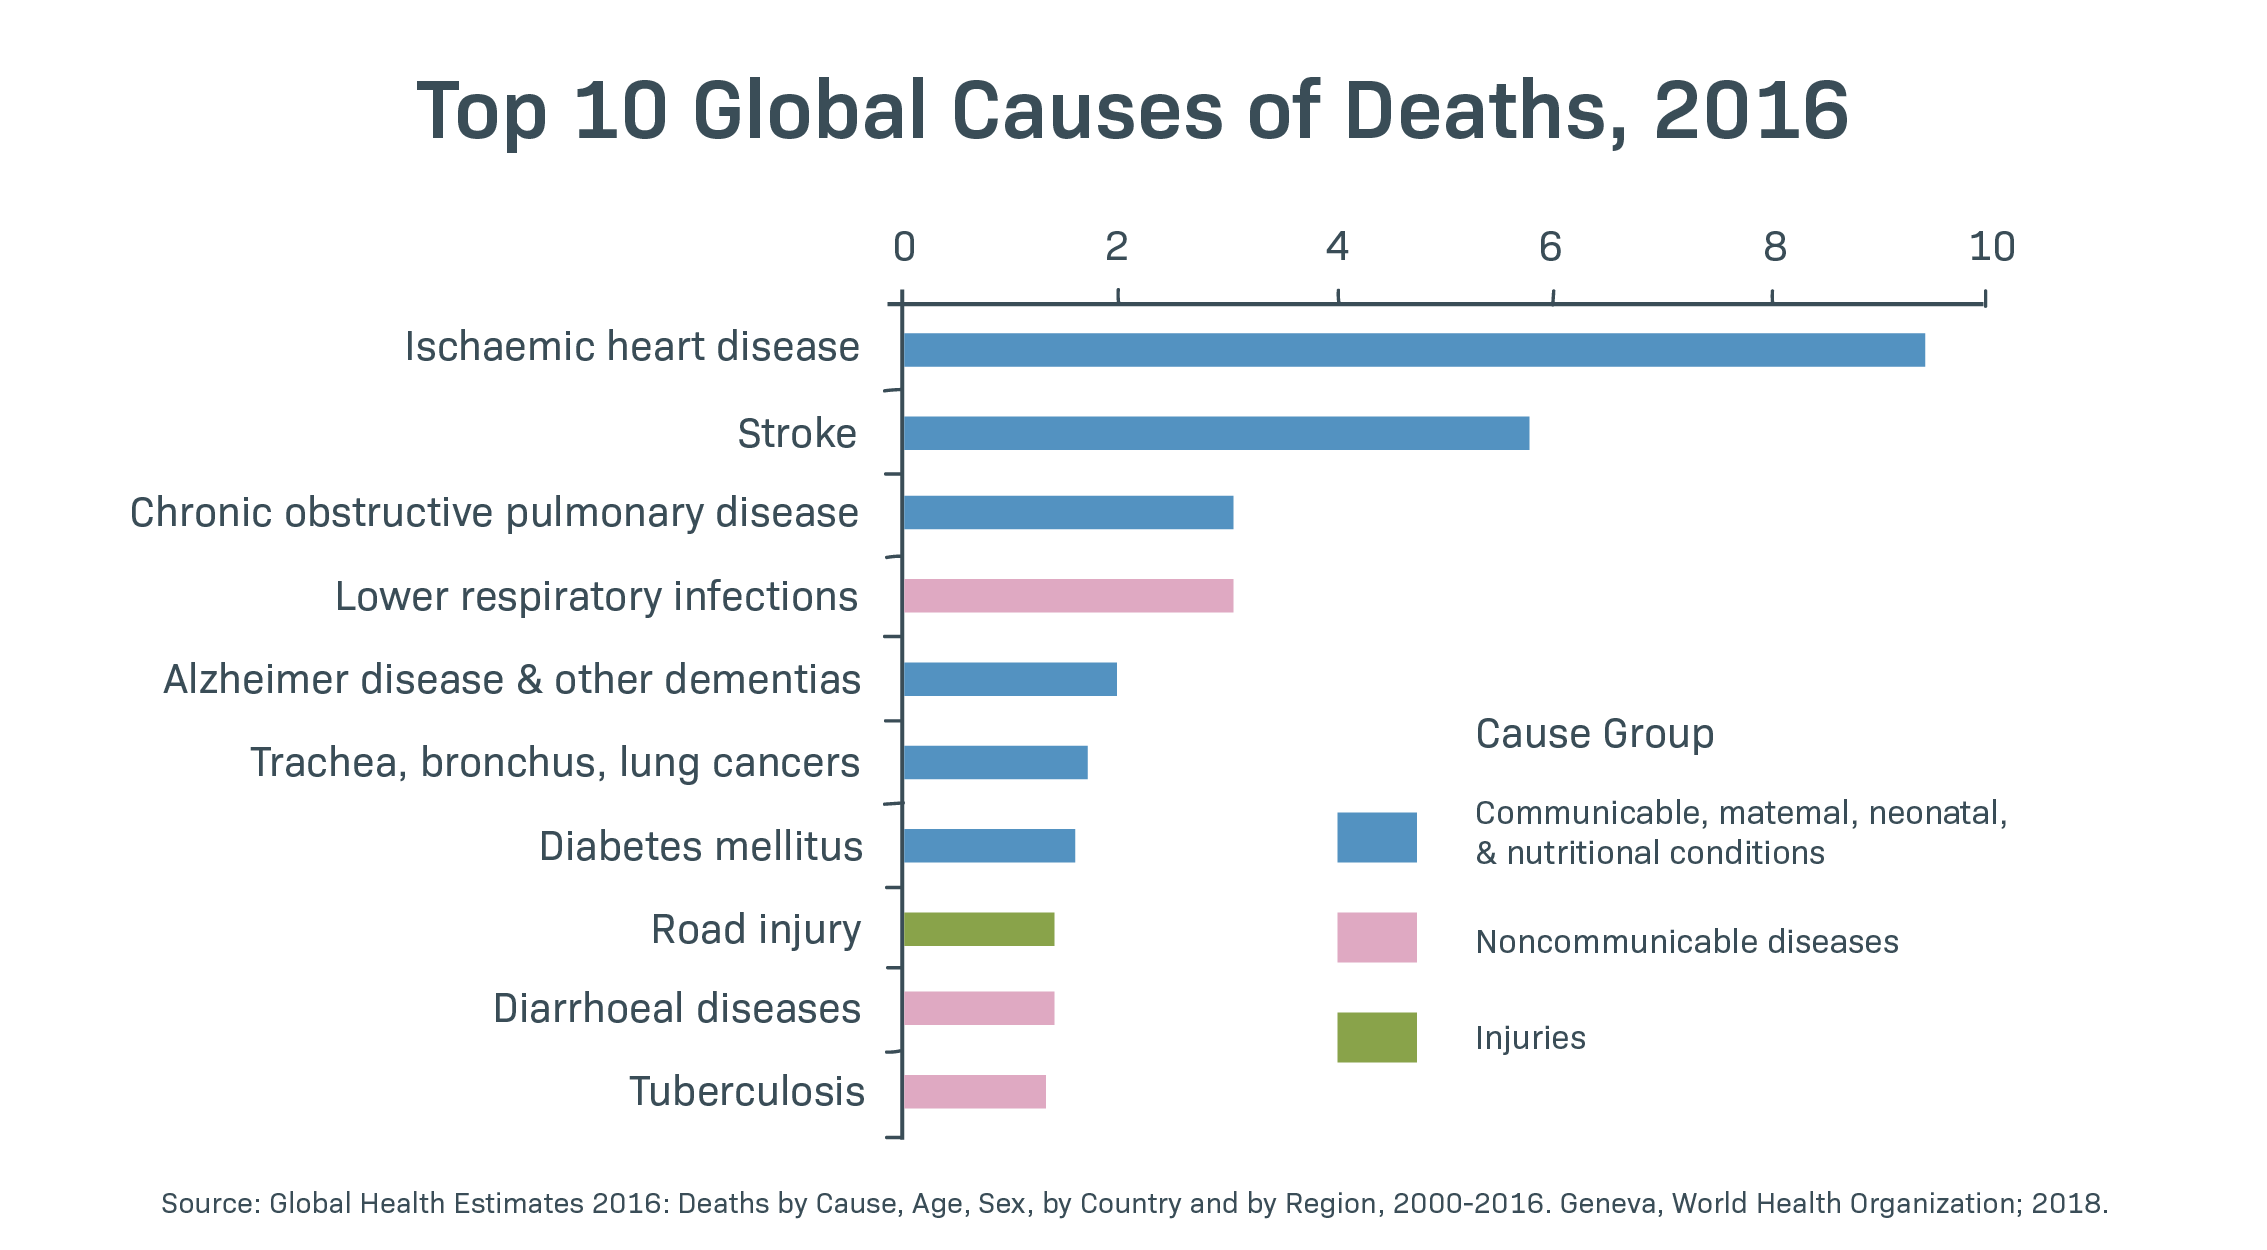 A chart showing the top 10 global causes of death from 2016. COPD is the third leading cause